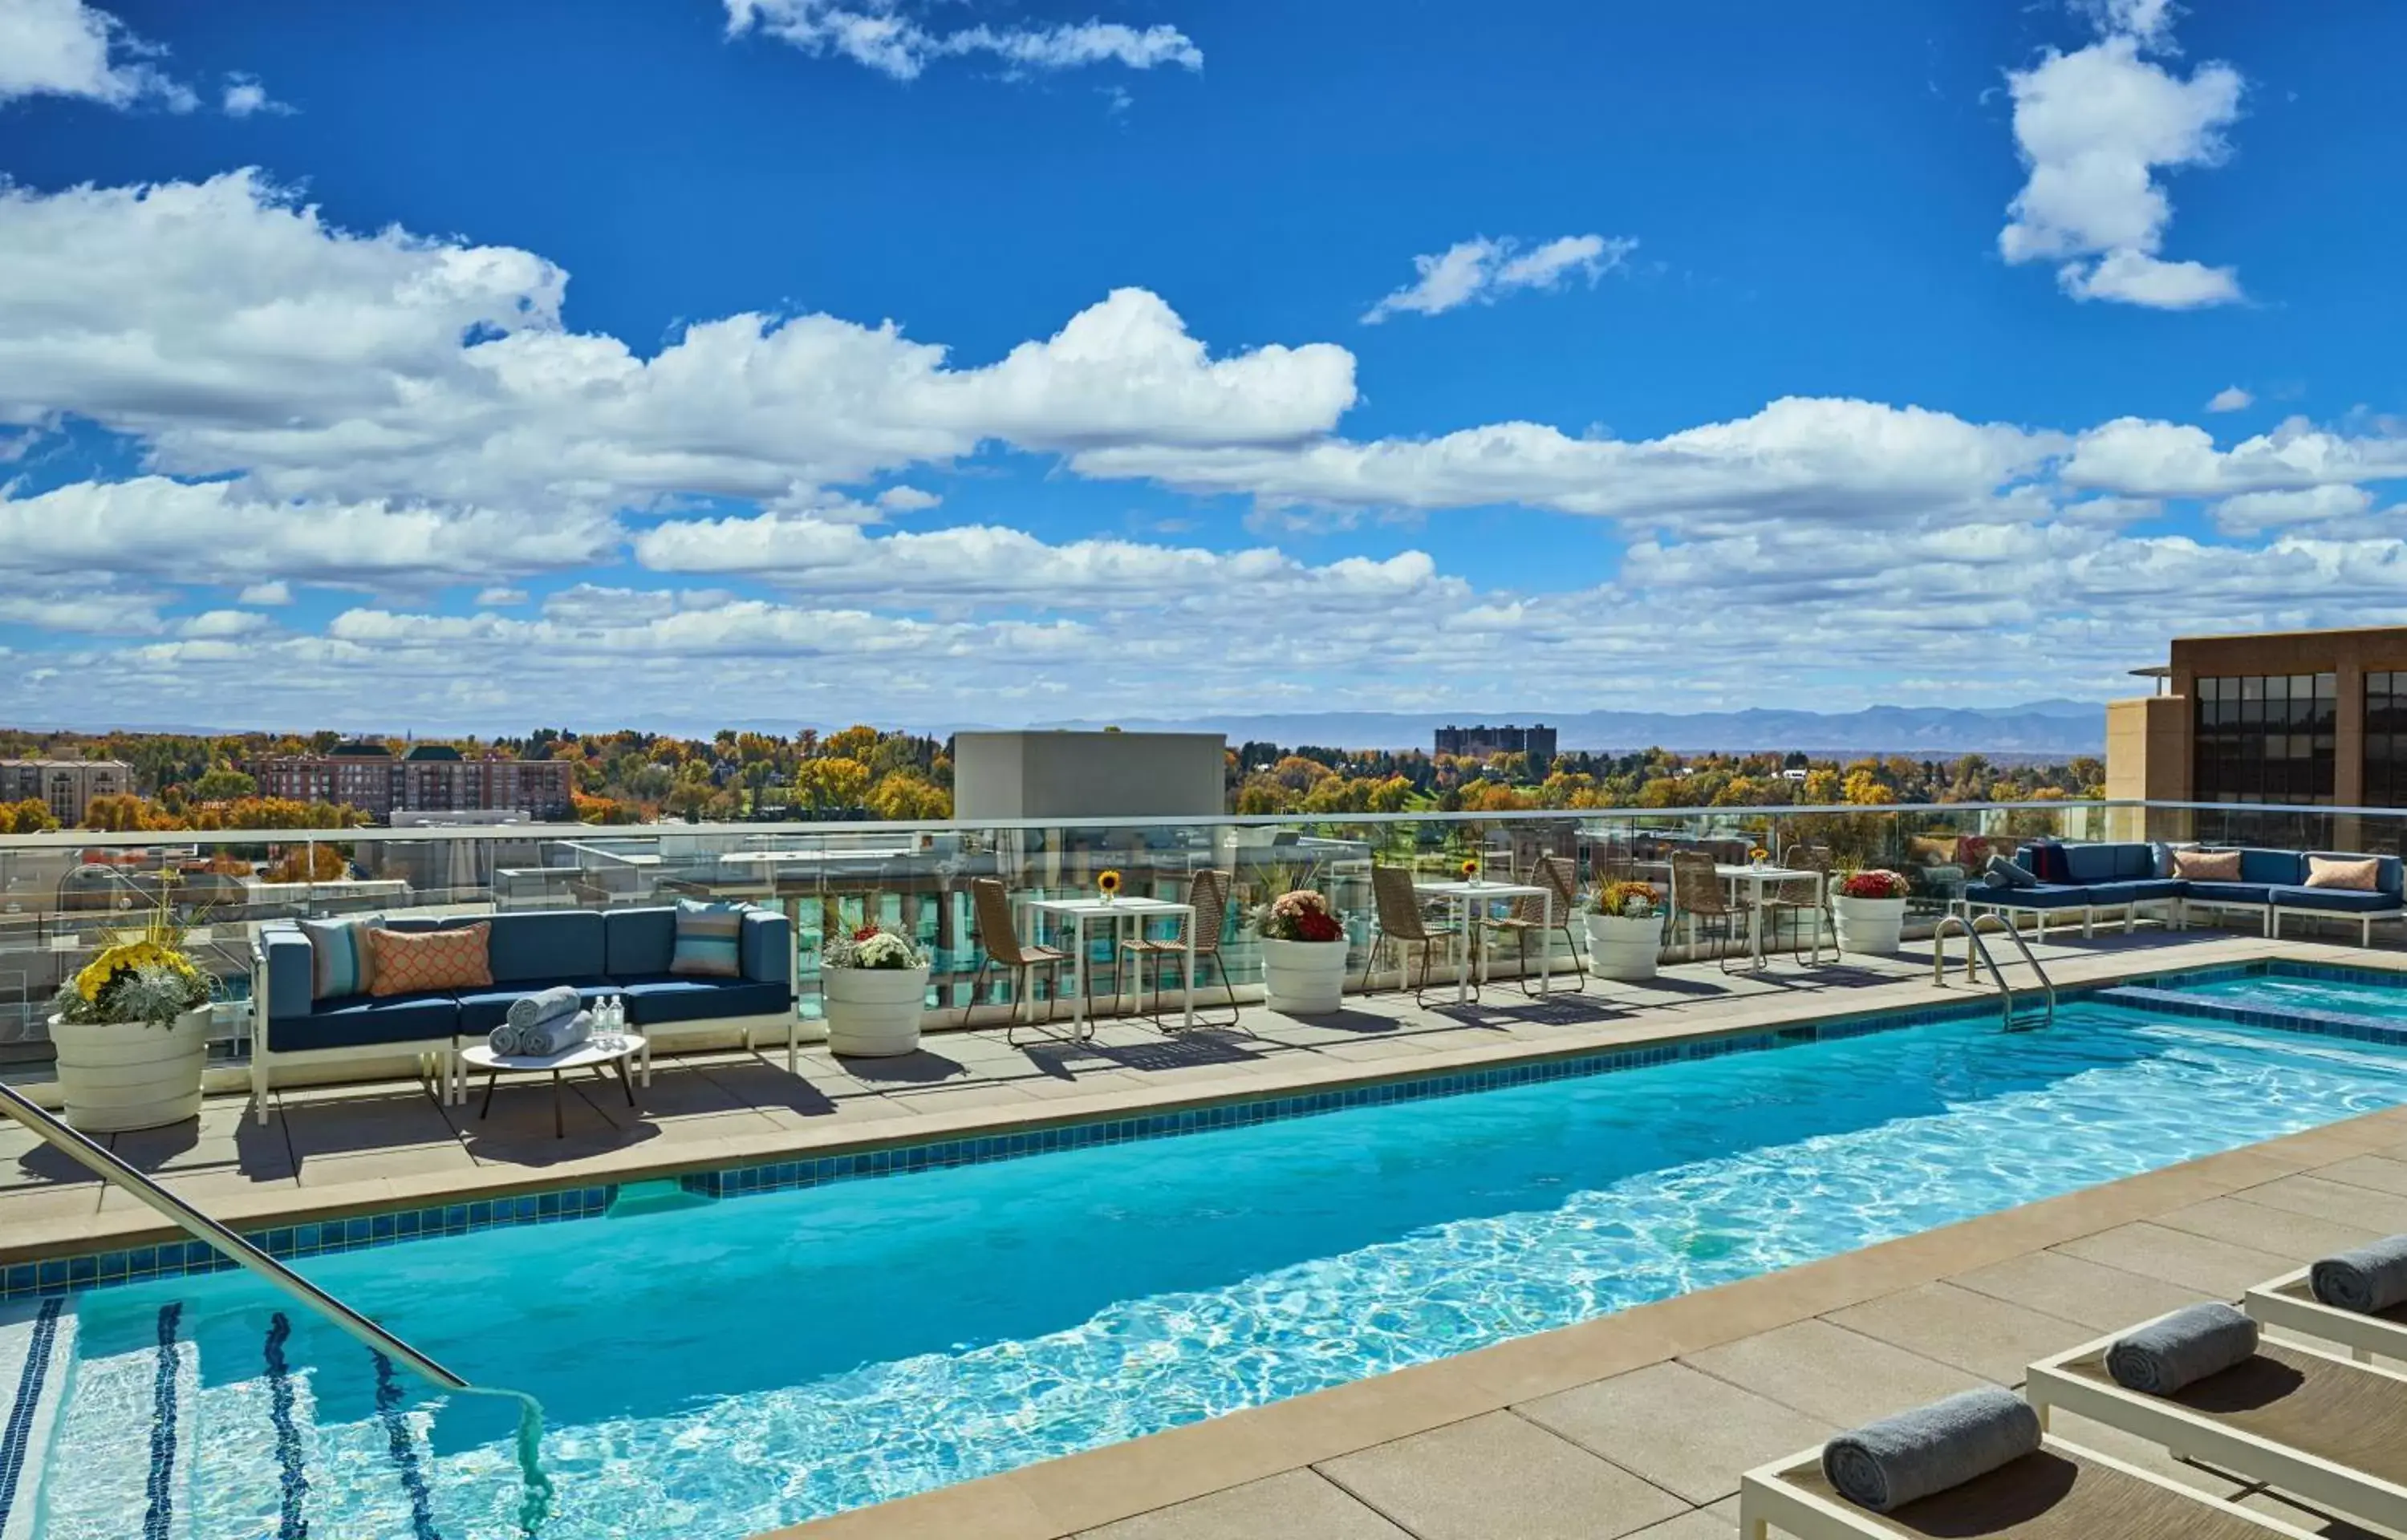 Swimming Pool in Halcyon - A Hotel in Cherry Creek